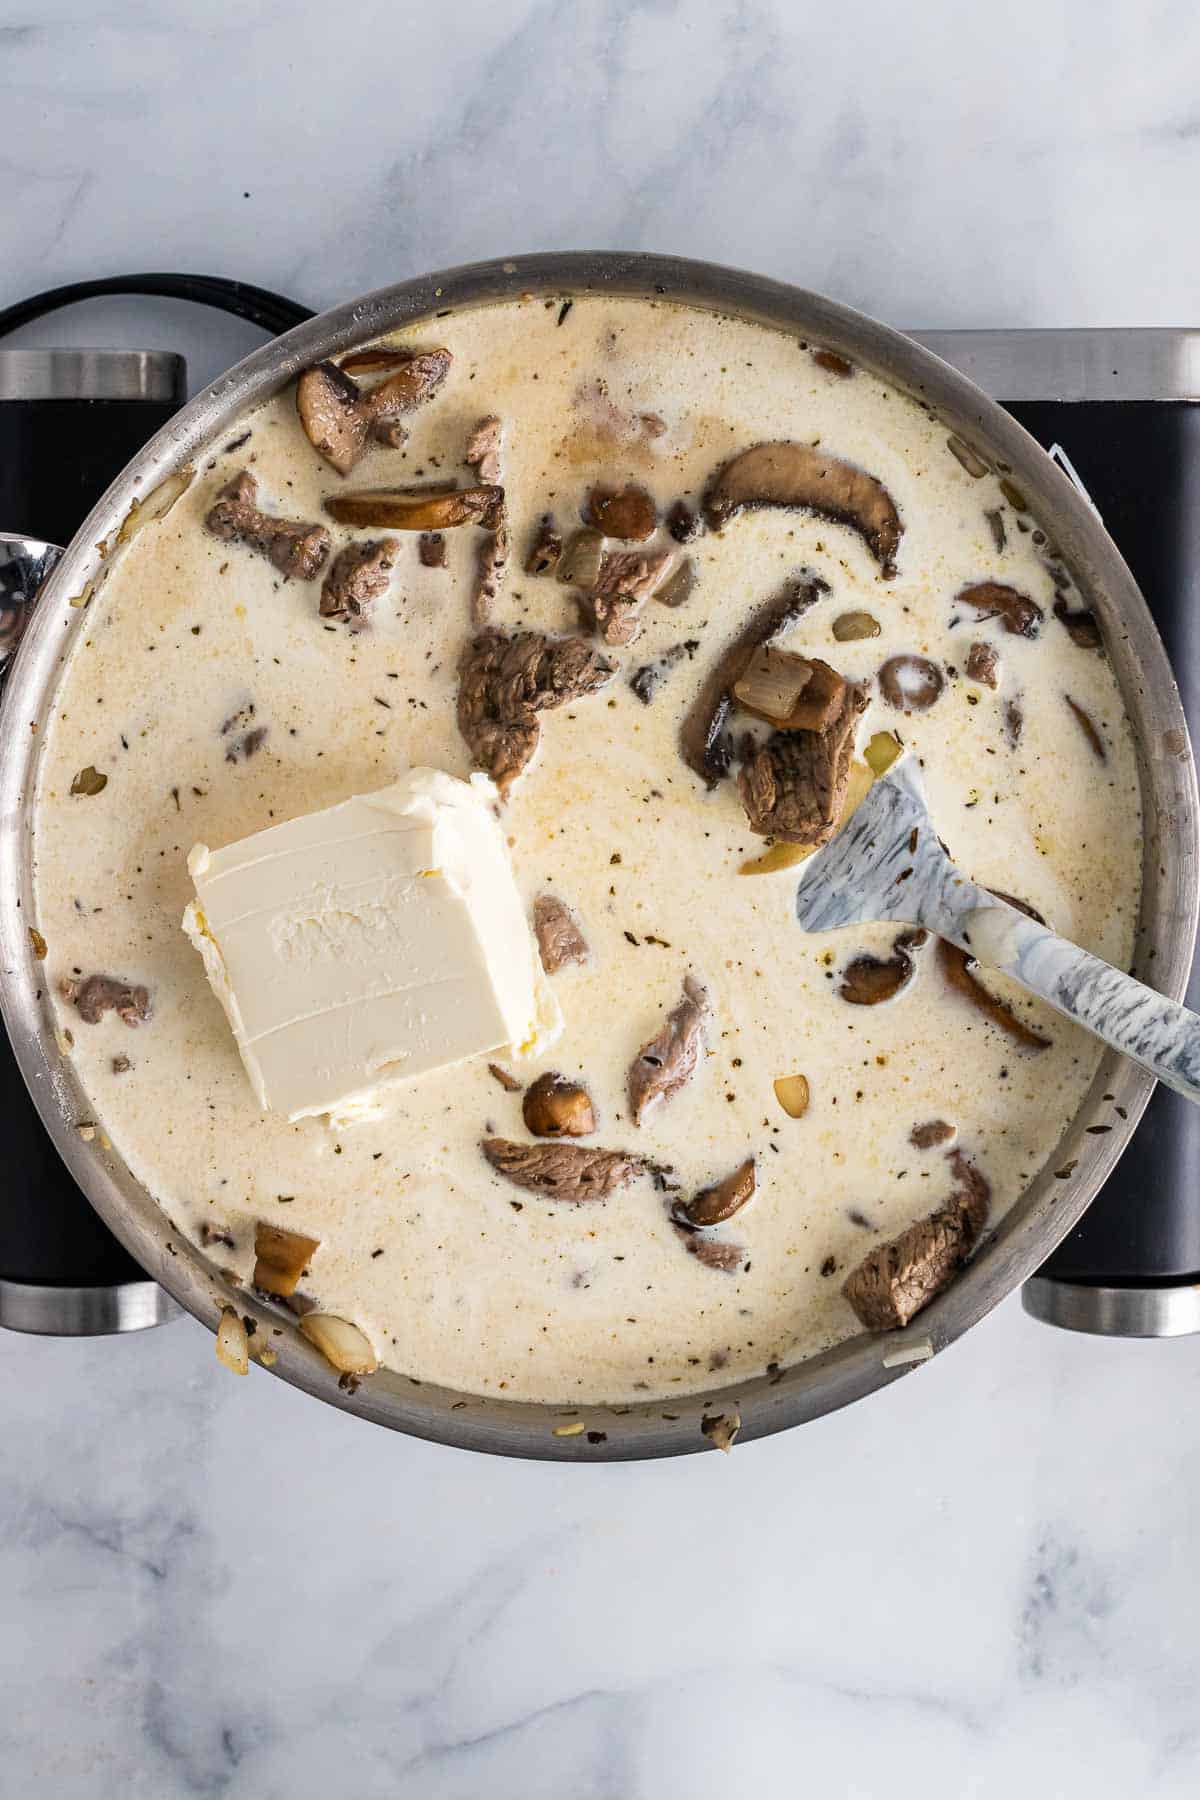 Broth, cream, cream cheese, and coconut aminos added to the mixture in the pan, as seen from above